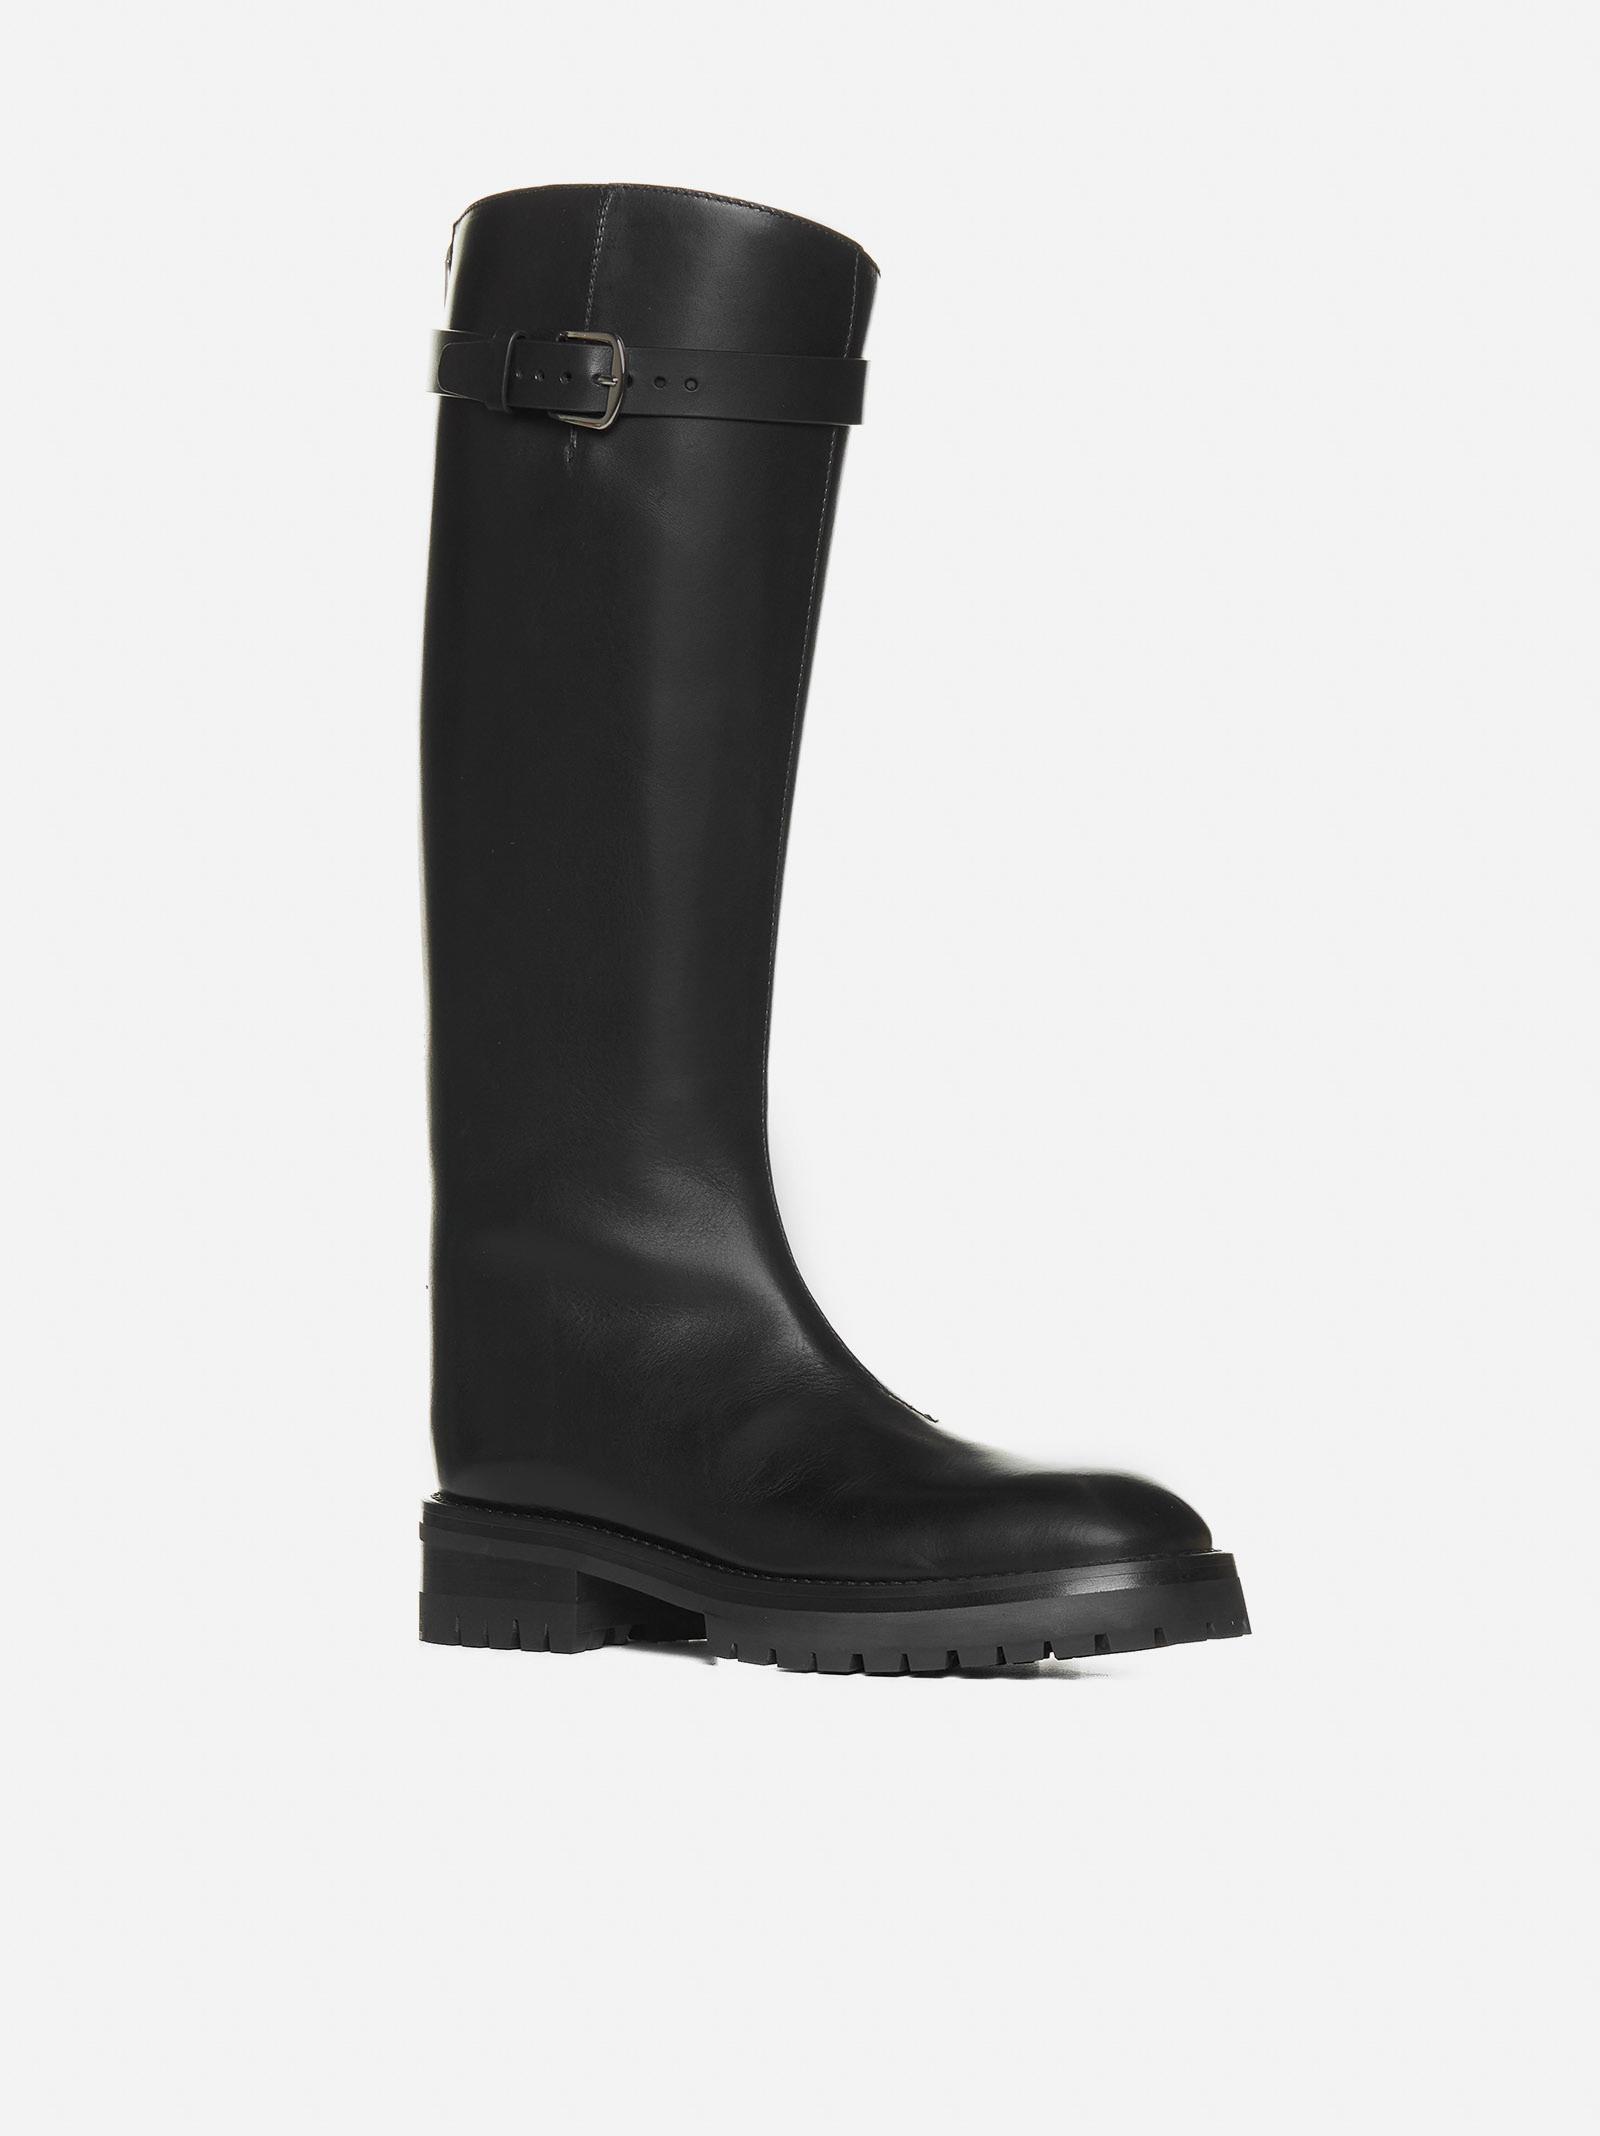 Ann Demeulemeester Nes Leather Riding Boots in Black | Lyst